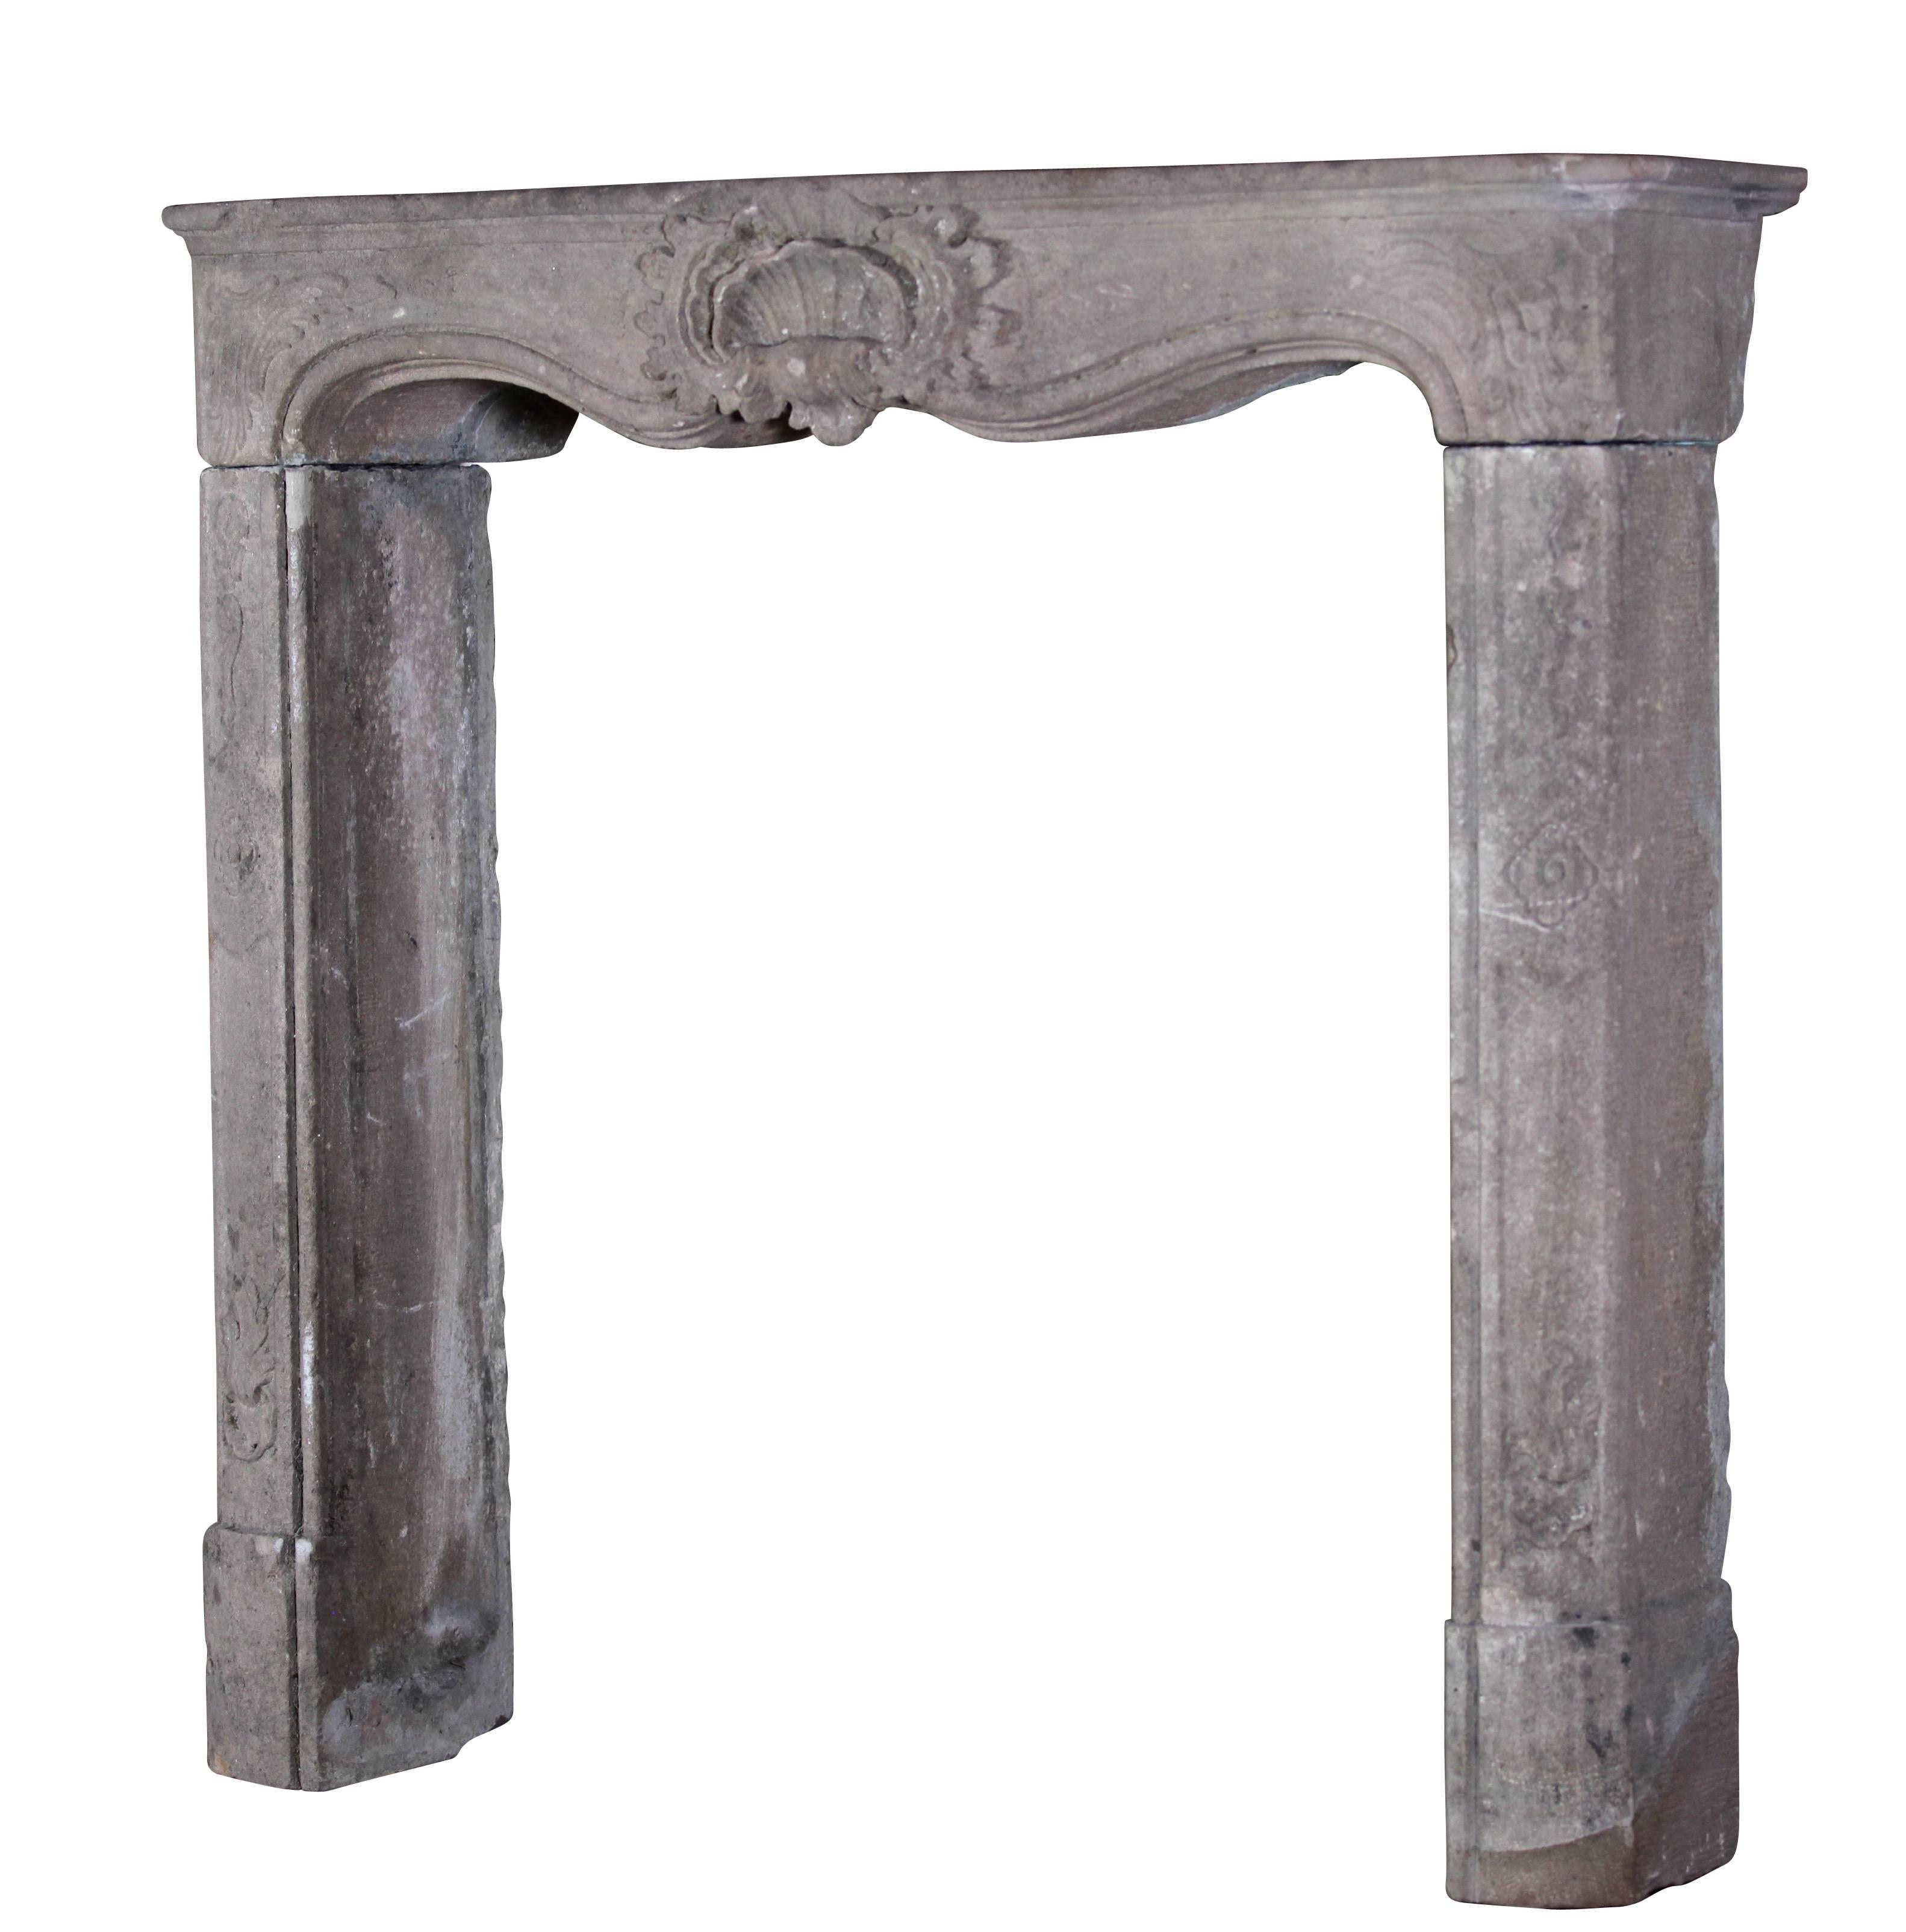 This petite Italian original antique mantel is in limestone kind called grezstone very beautiful. A real petite jewel. It also has remains of the original polychrome. A perfect match for a country refined interior design.

Measurements;
102 cm EW